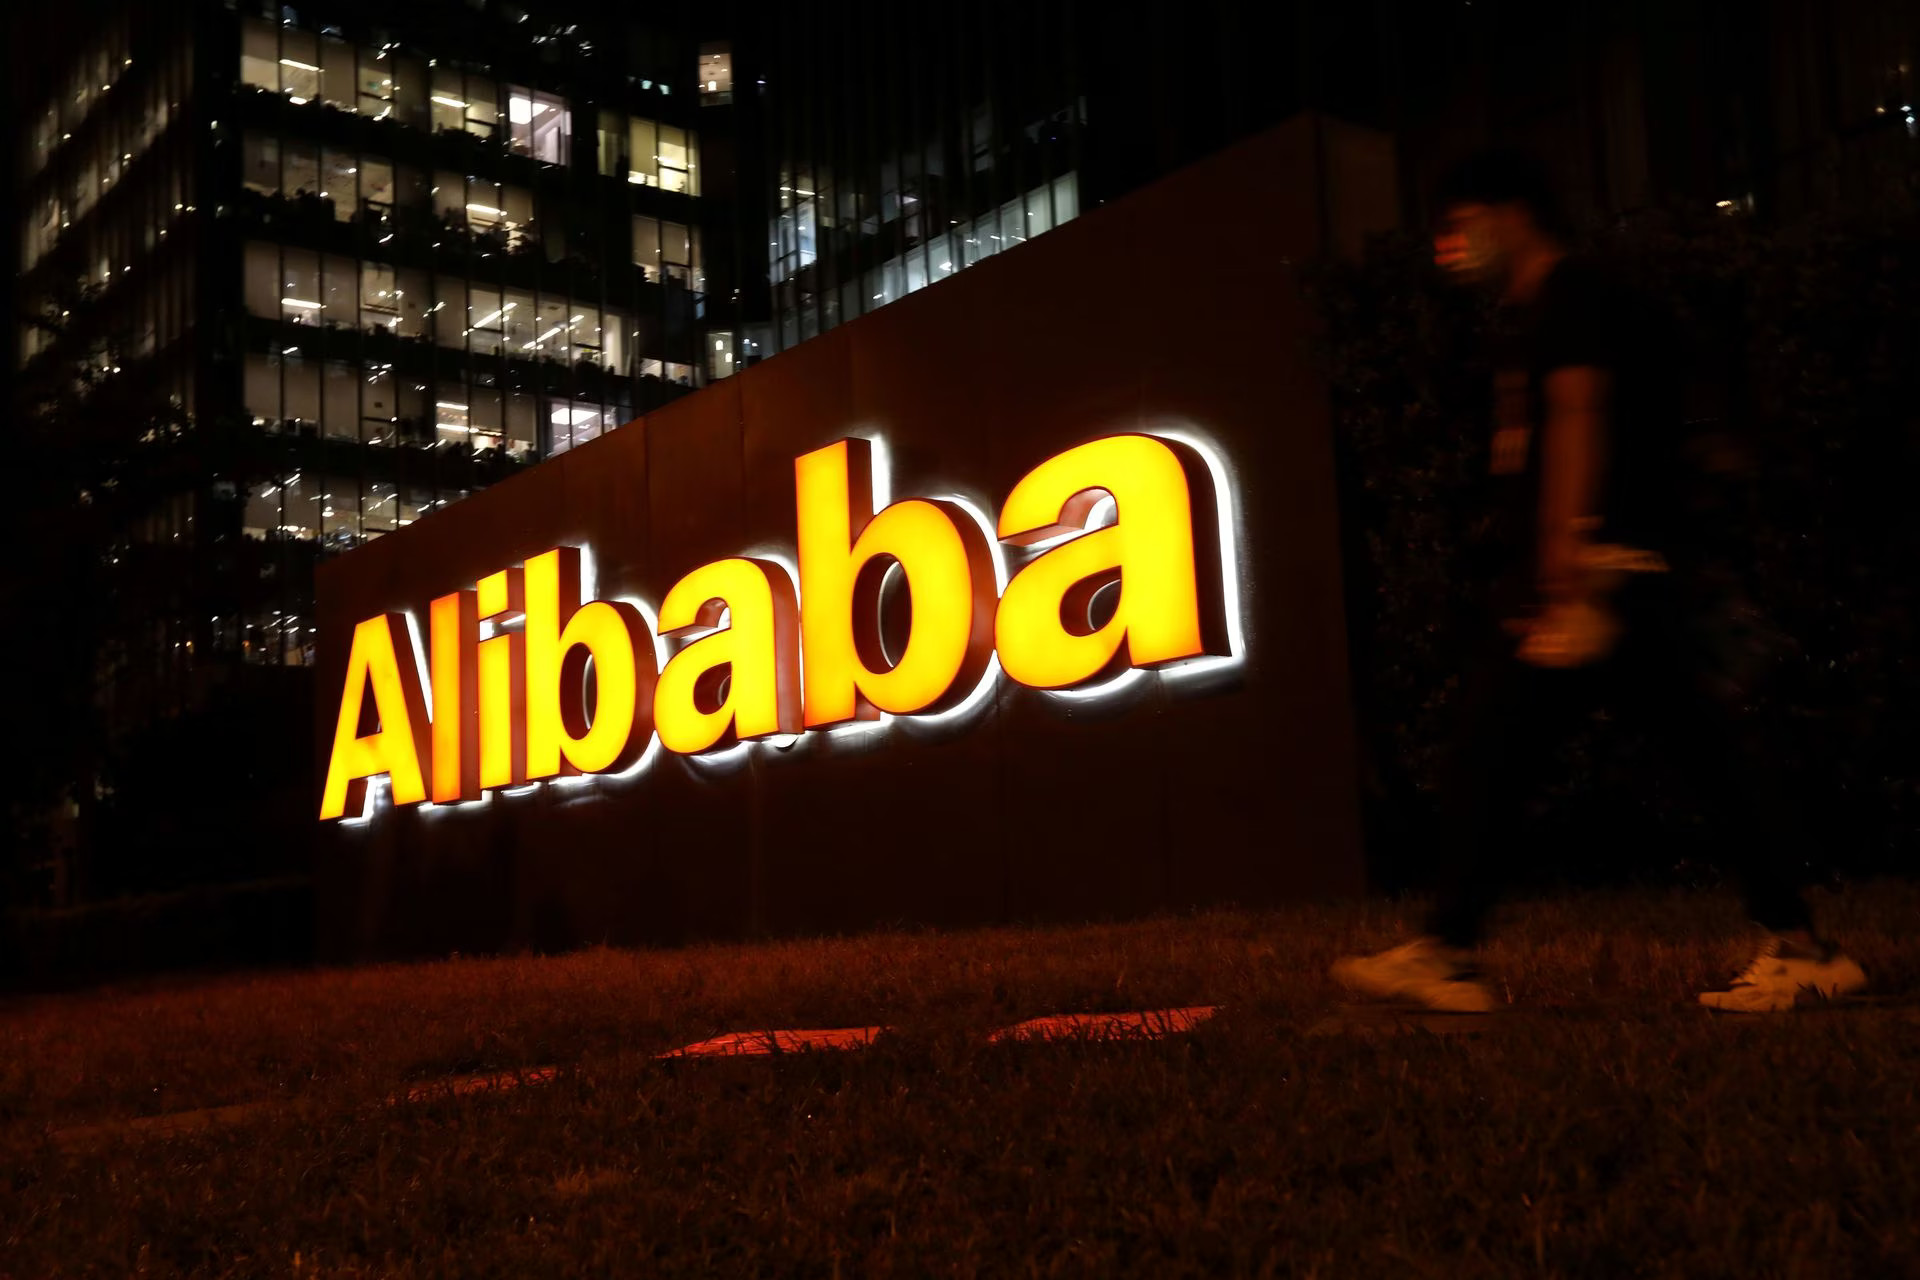 Alibaba in Europe - a credible security threat?